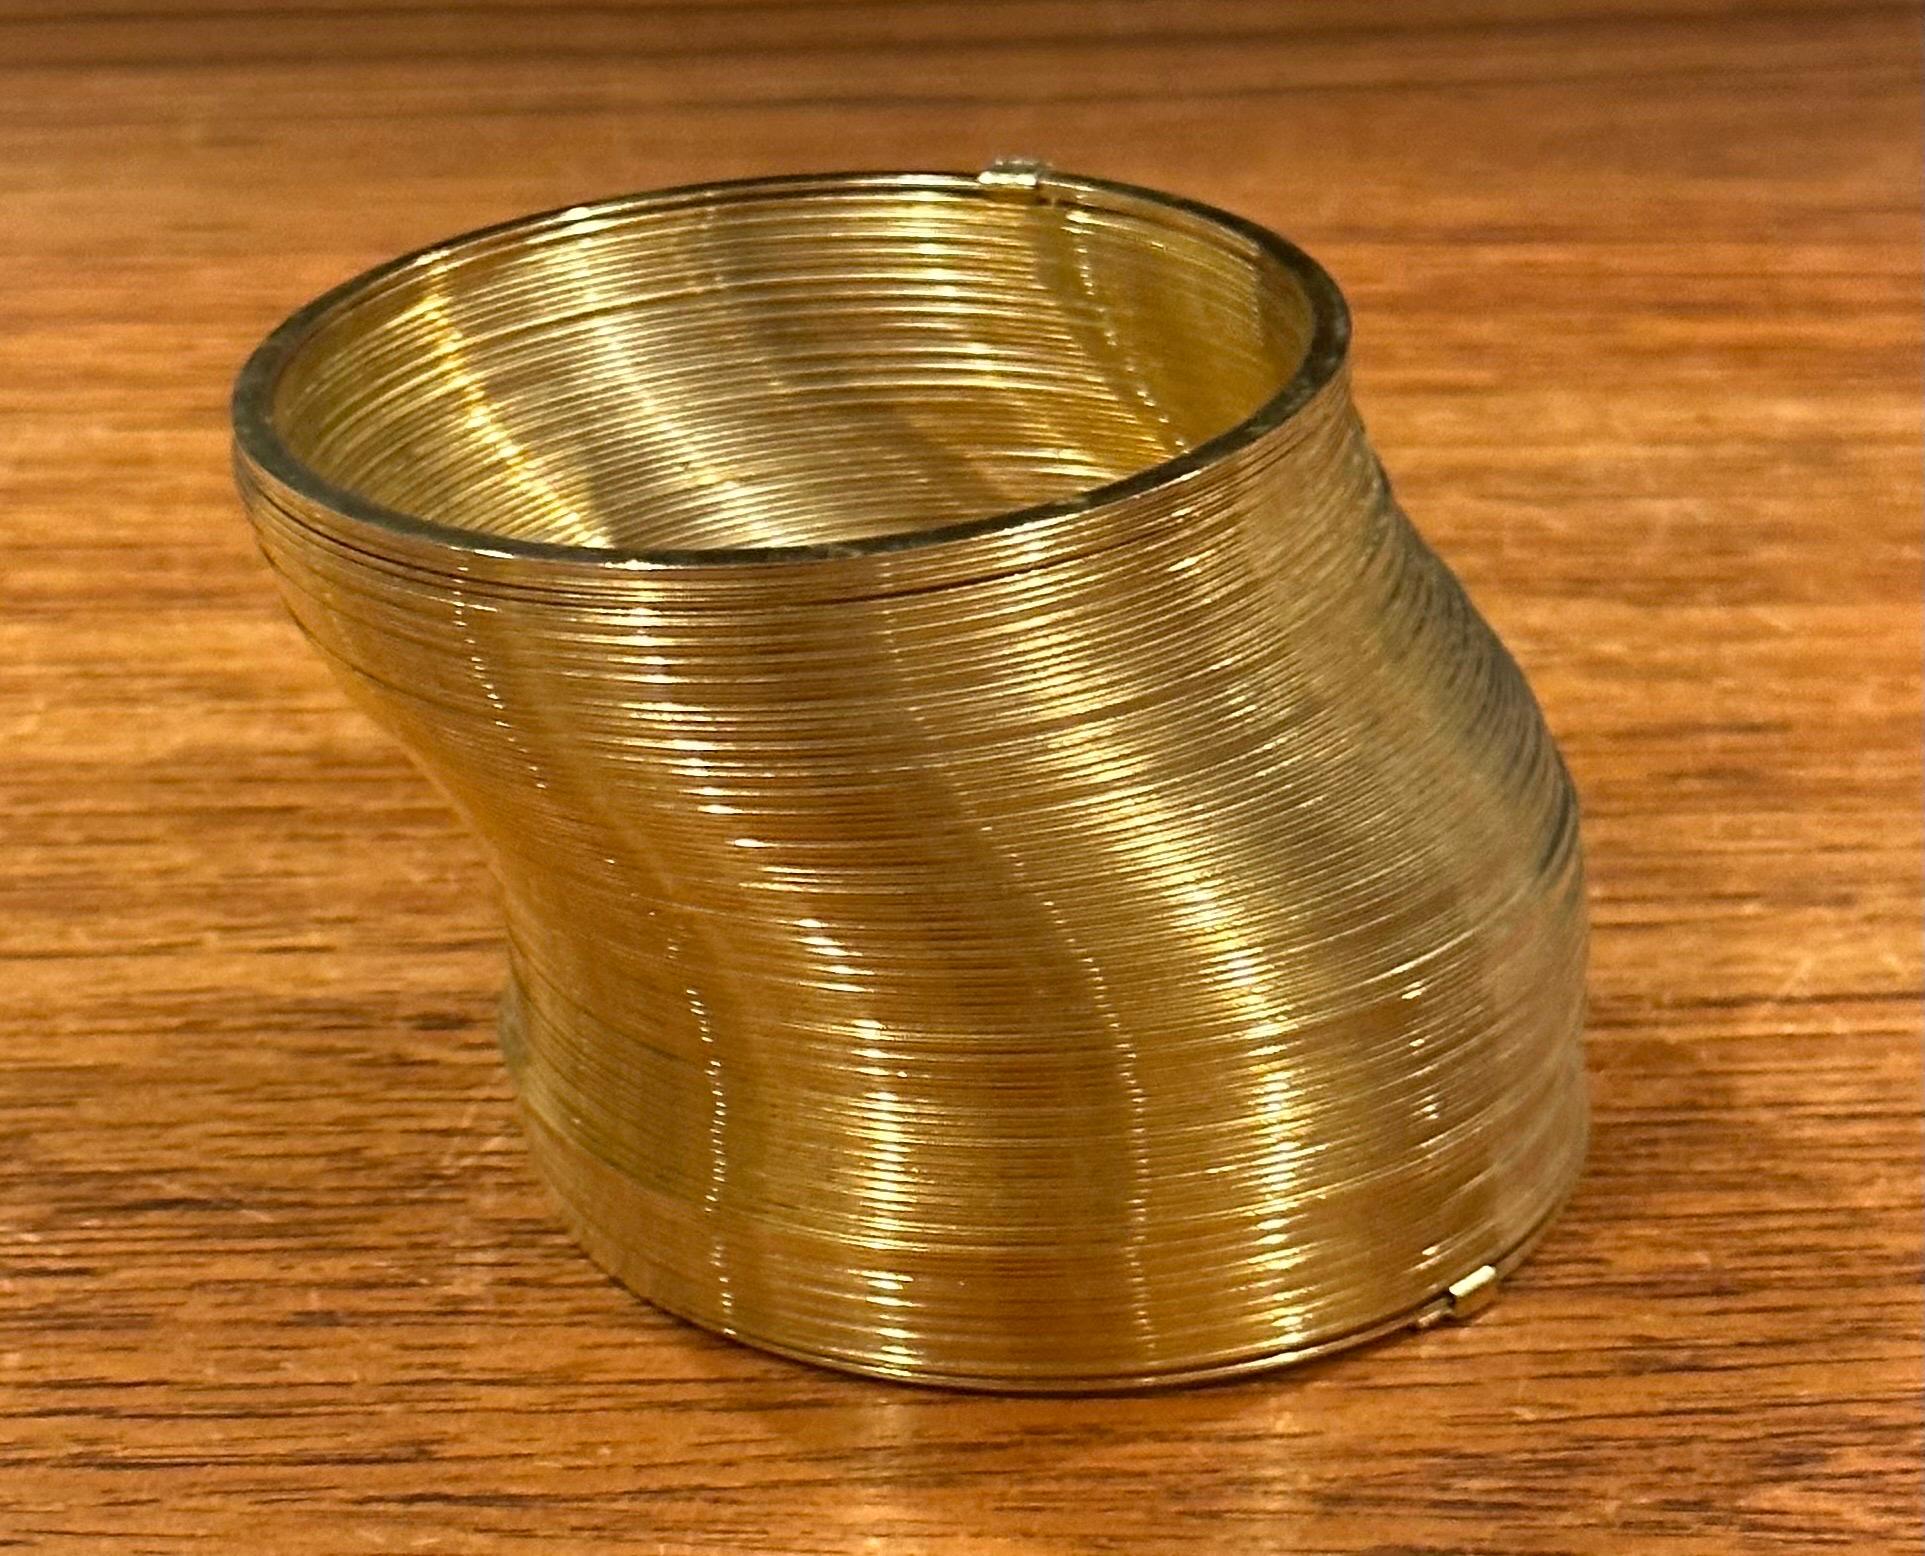 20th Century 50th Anniversary Gold-Plated Slinky Toy in Wood Box For Sale